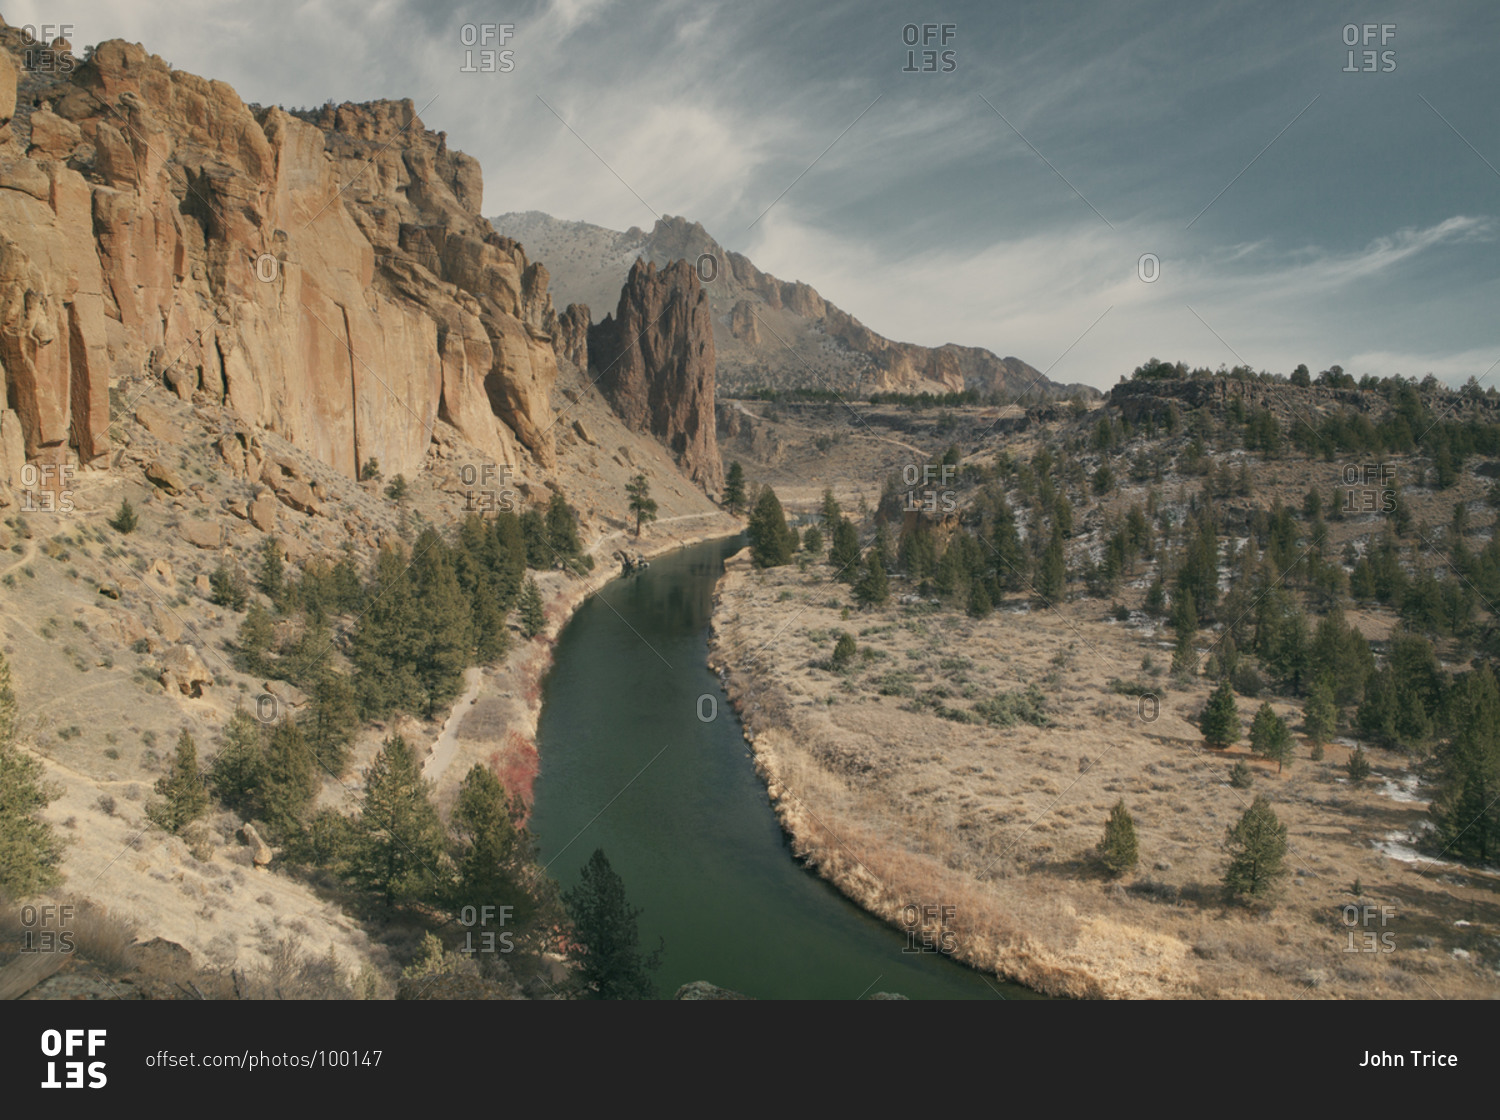 Jagged rock formations and cliffs along the Crooked River, Smith Rock State Park, Oregon